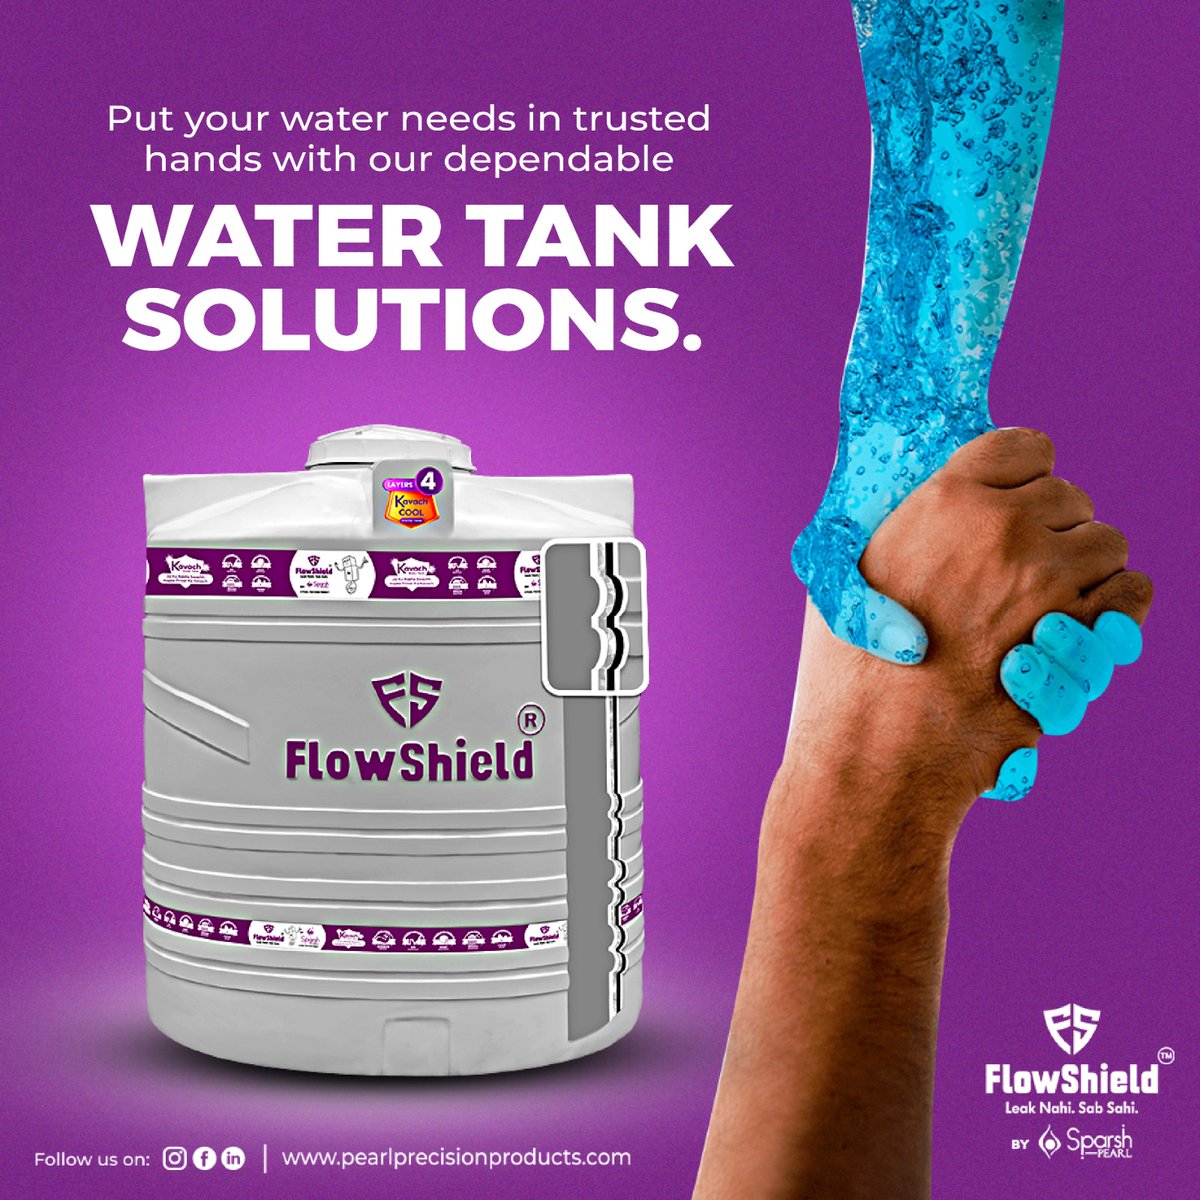 Beat the heat in style while conserving water with our sleek, eco-friendly solution.  Introducing Kavach Cool Water Tank - where style meets sustainability.
 
#Flowshield #SparshPearl #KavachCool #InnovativeDesign #StayCool #SustainableLiving